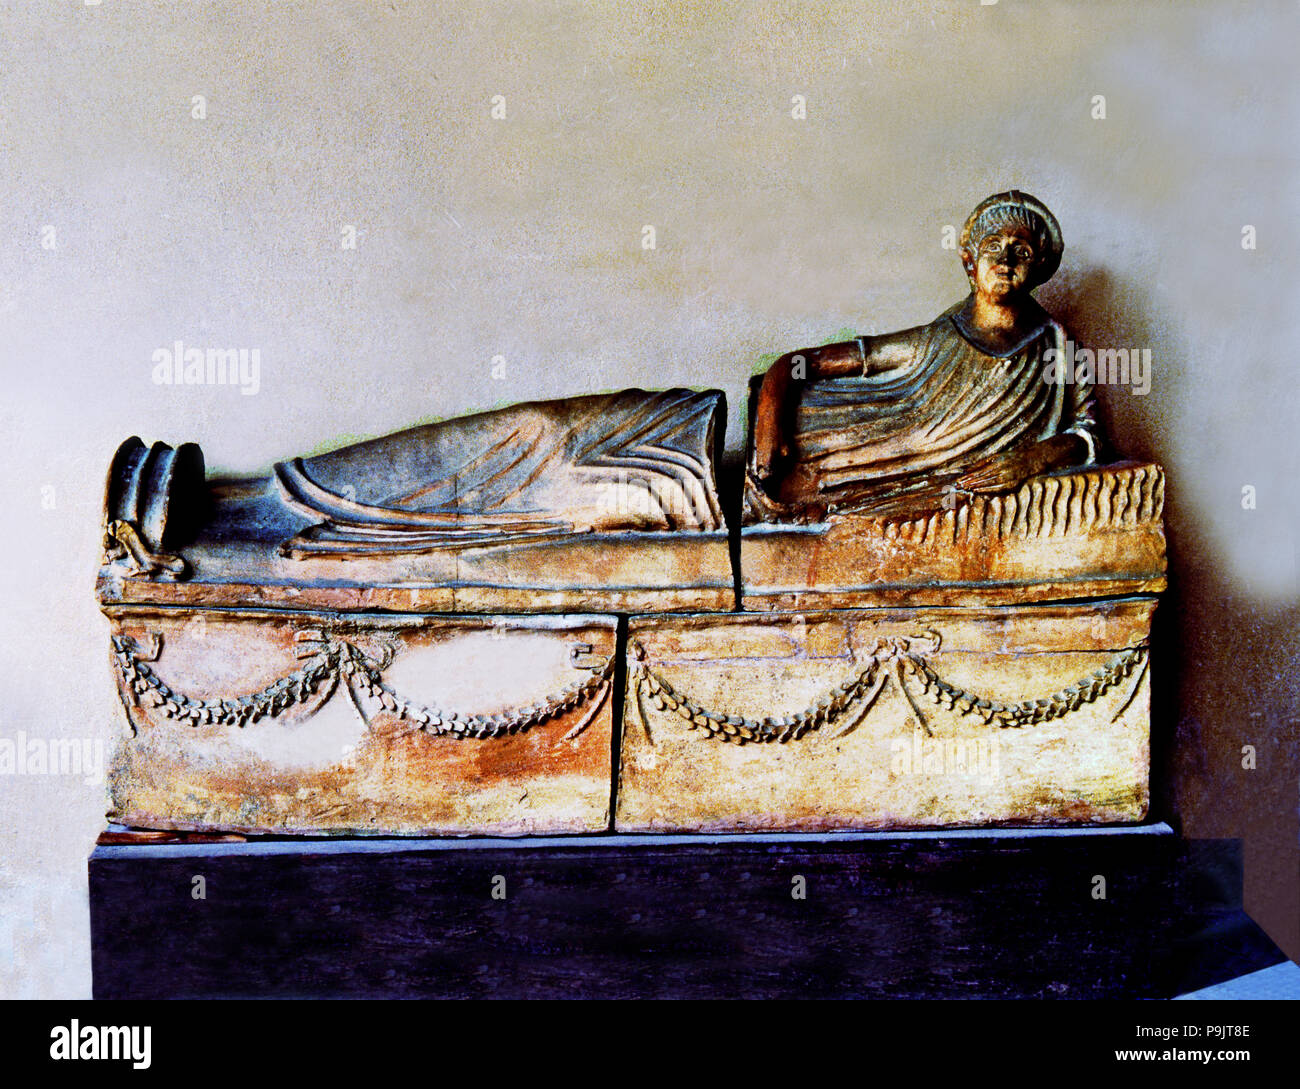 Etruscan terracotta sarcophagus with the image of the deceased. Stock Photo